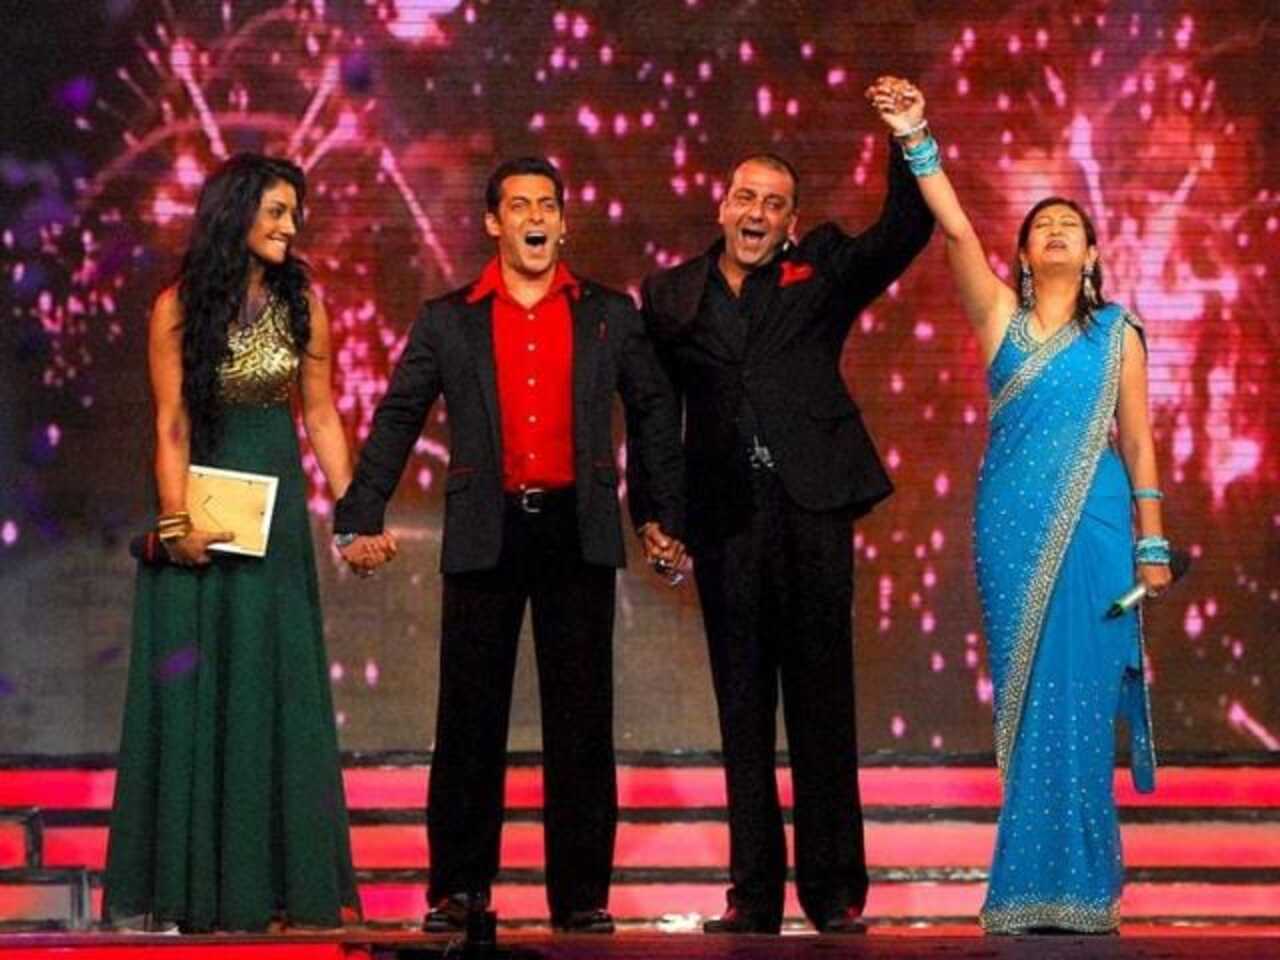 Bigg Boss Season 5 (2011) - Winner: Juhi Parmar
Juhi Parmar's affable personality brought her victory in the 5th season of the show